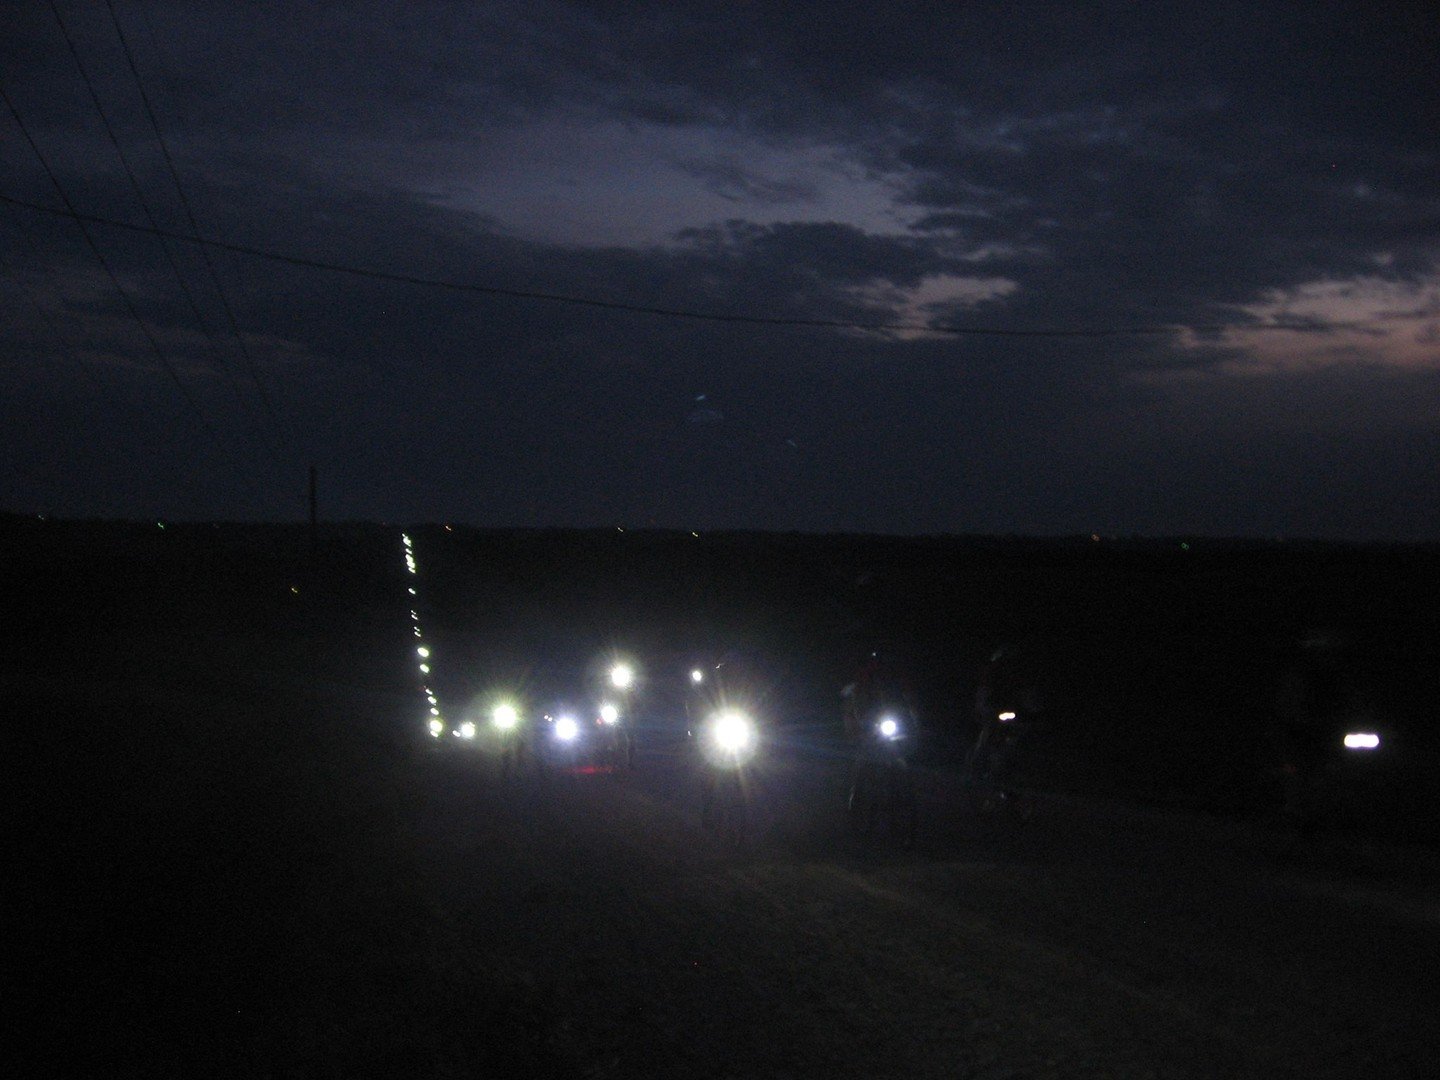 TBT: Gravel Worlds 2013. Yes we started in the dark way back then too. ⁠
⁠
Come celebrate 15 years of starting in the dark!⁠
⁠
Reg at www.gravel-worlds.com